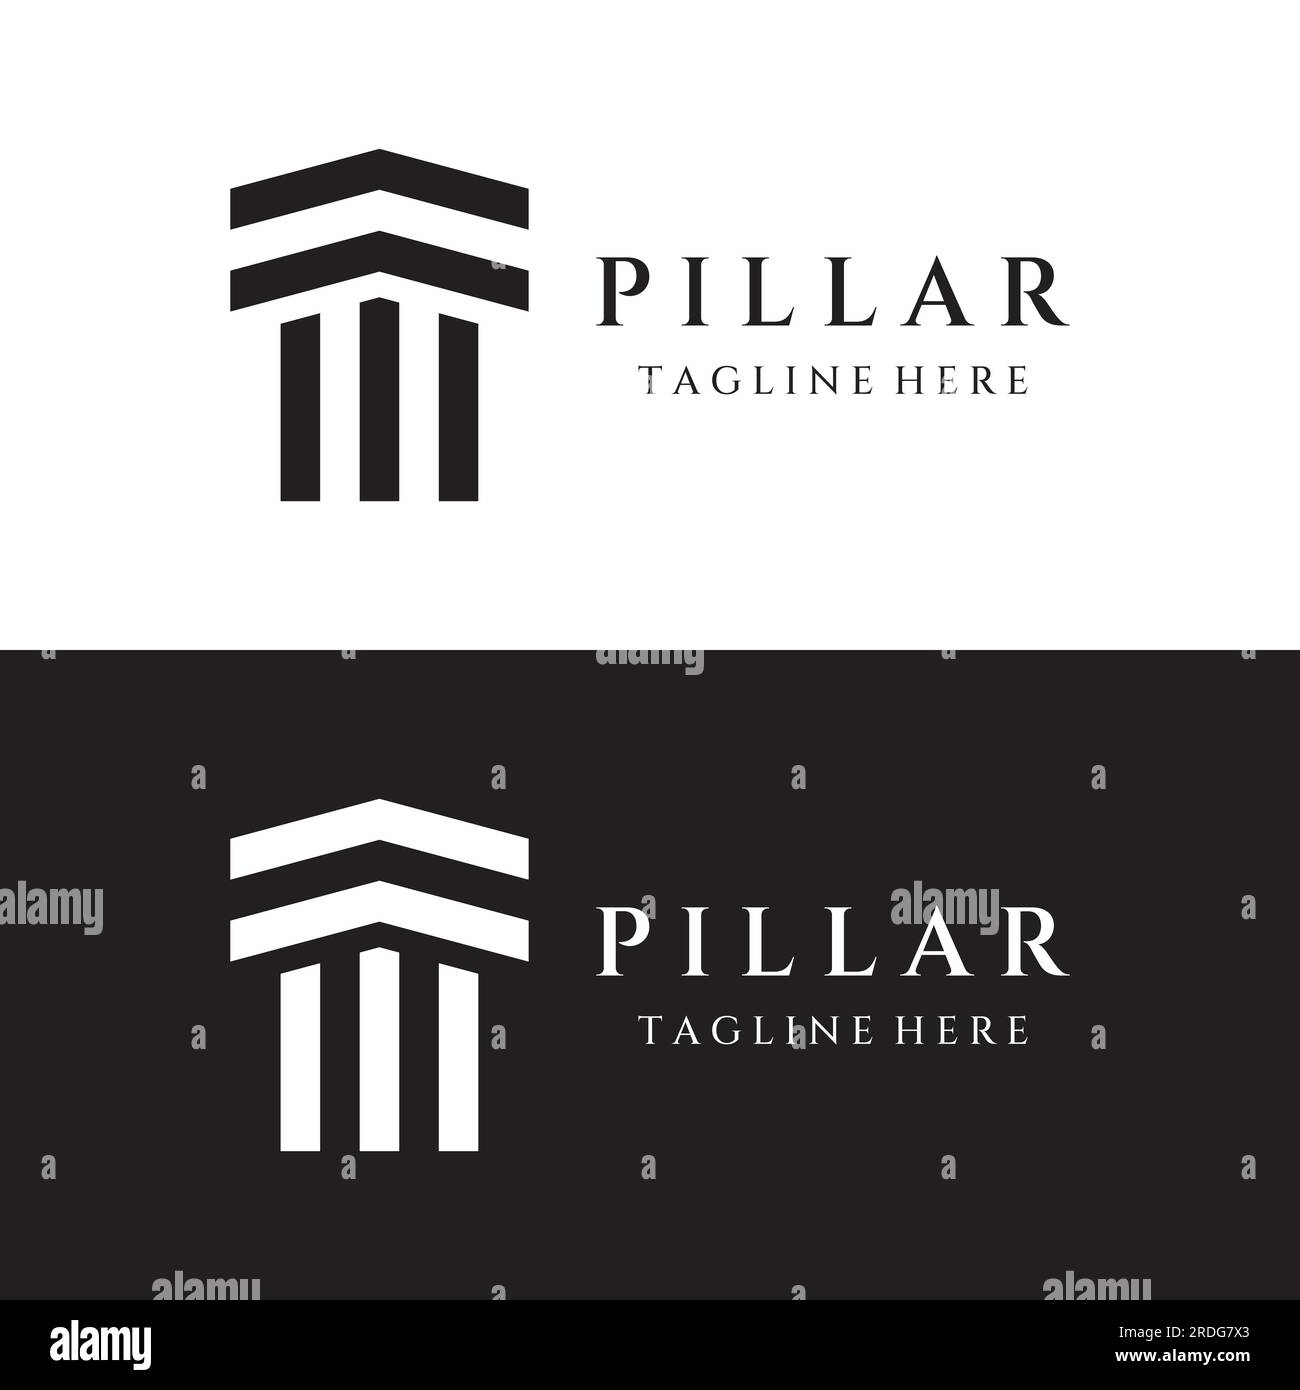 Ancient Greek pillars or columns logo design. Logos for business, lawyers, legal justice and building architects. Stock Vector